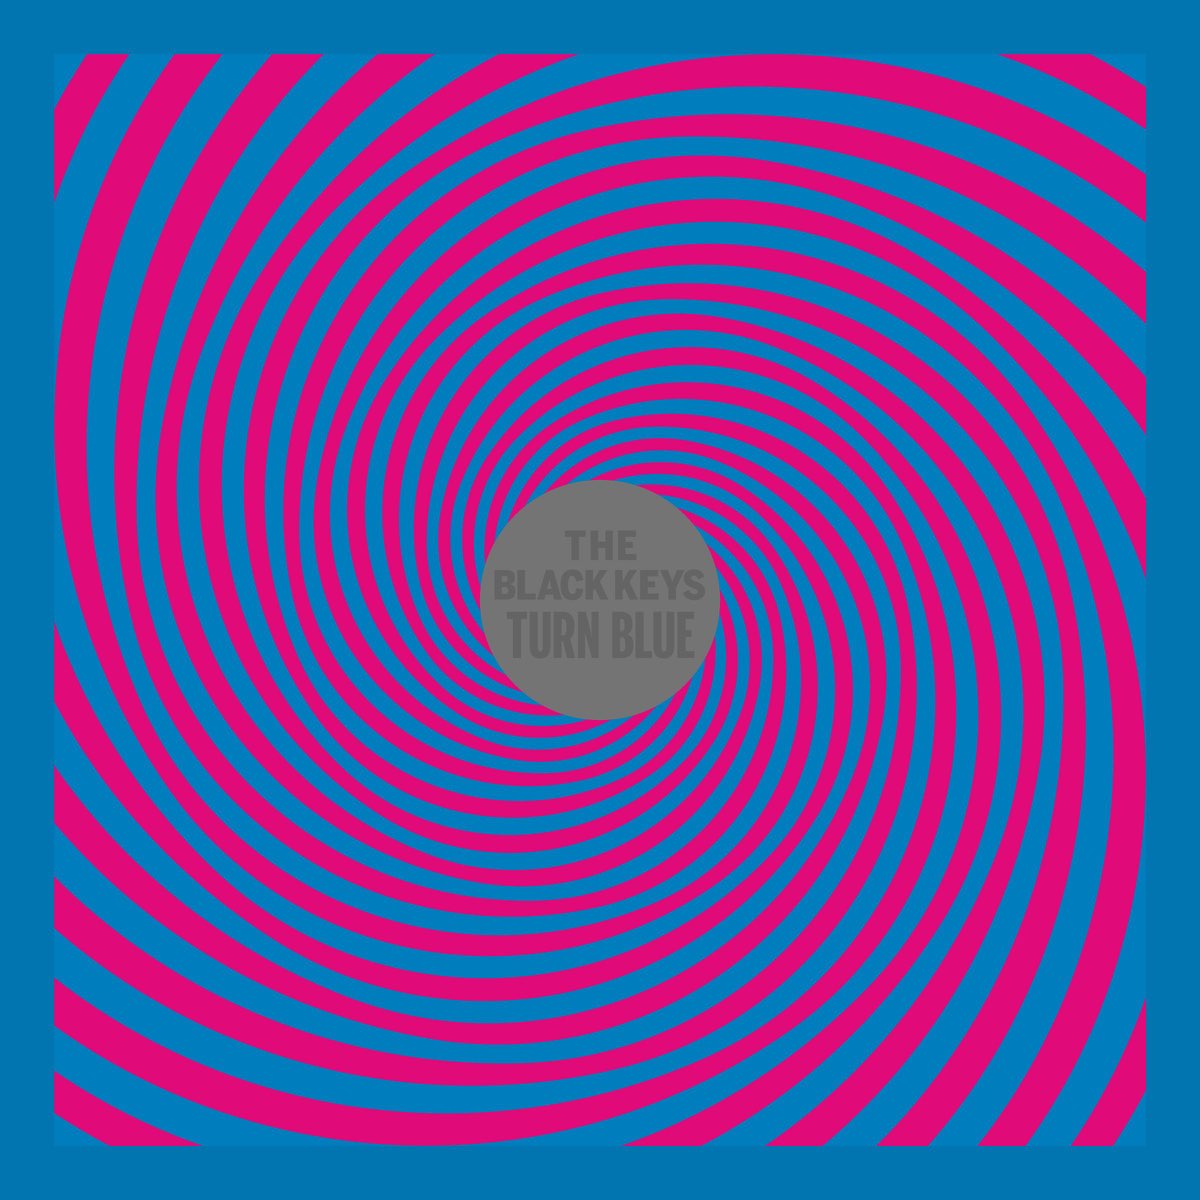 10 years ago today, #theBlackKeys released “Turn Blue” (@NonesuchRecords). Dance all night. Read our classic @theblackkeys feature from 2004: magnetmagazine.com/2005/01/15/the…